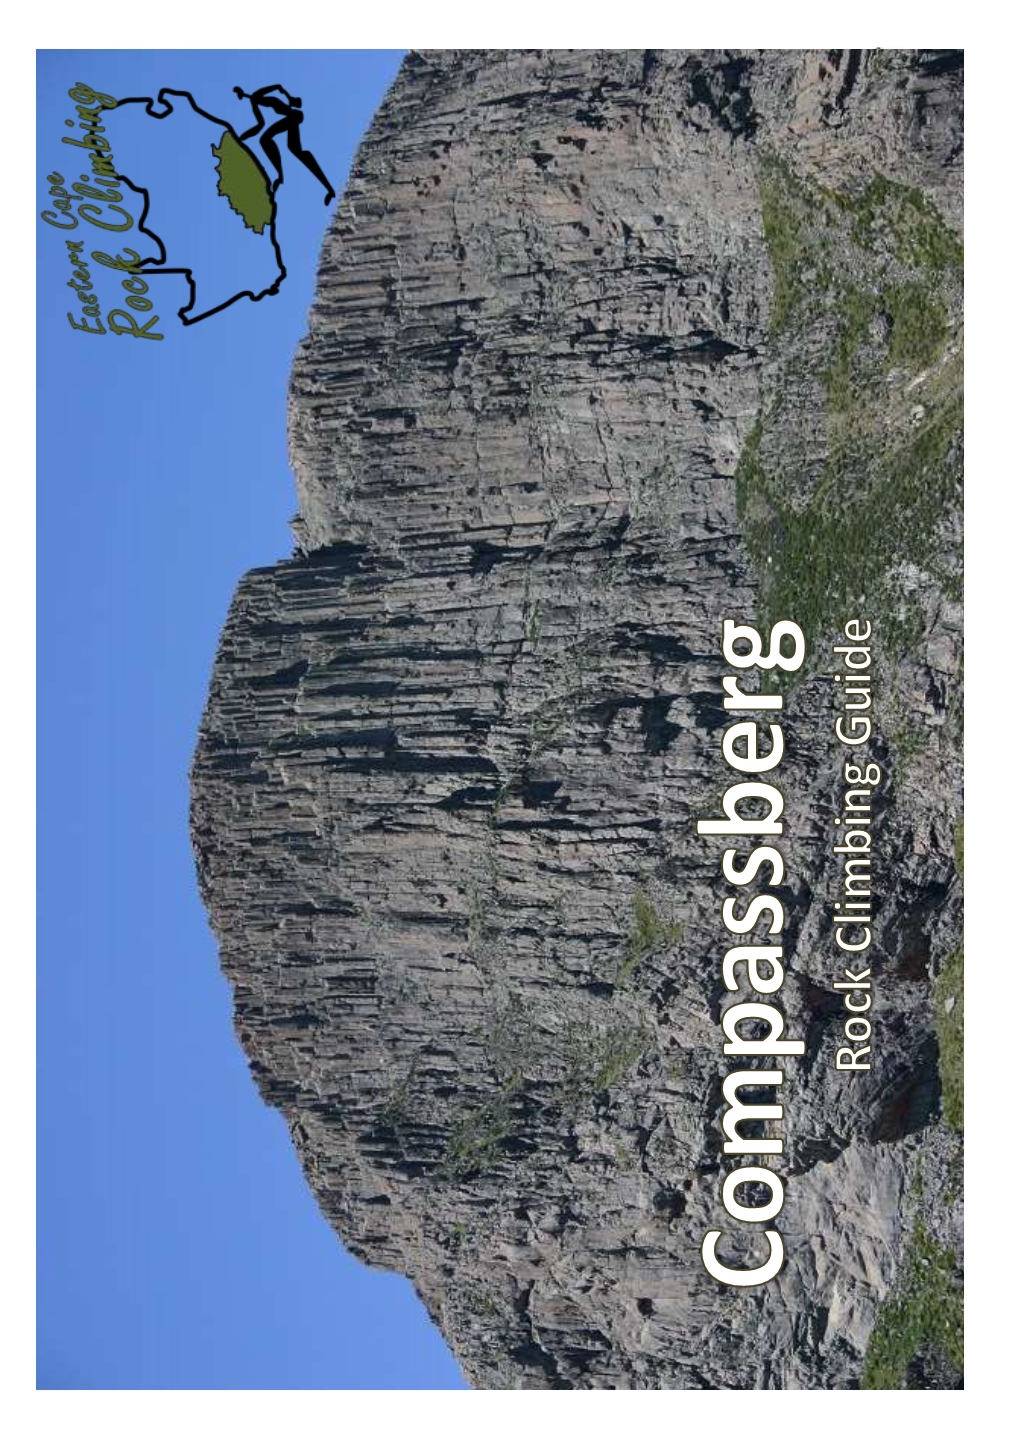 New Routes on Compassberg, Sneeuberge